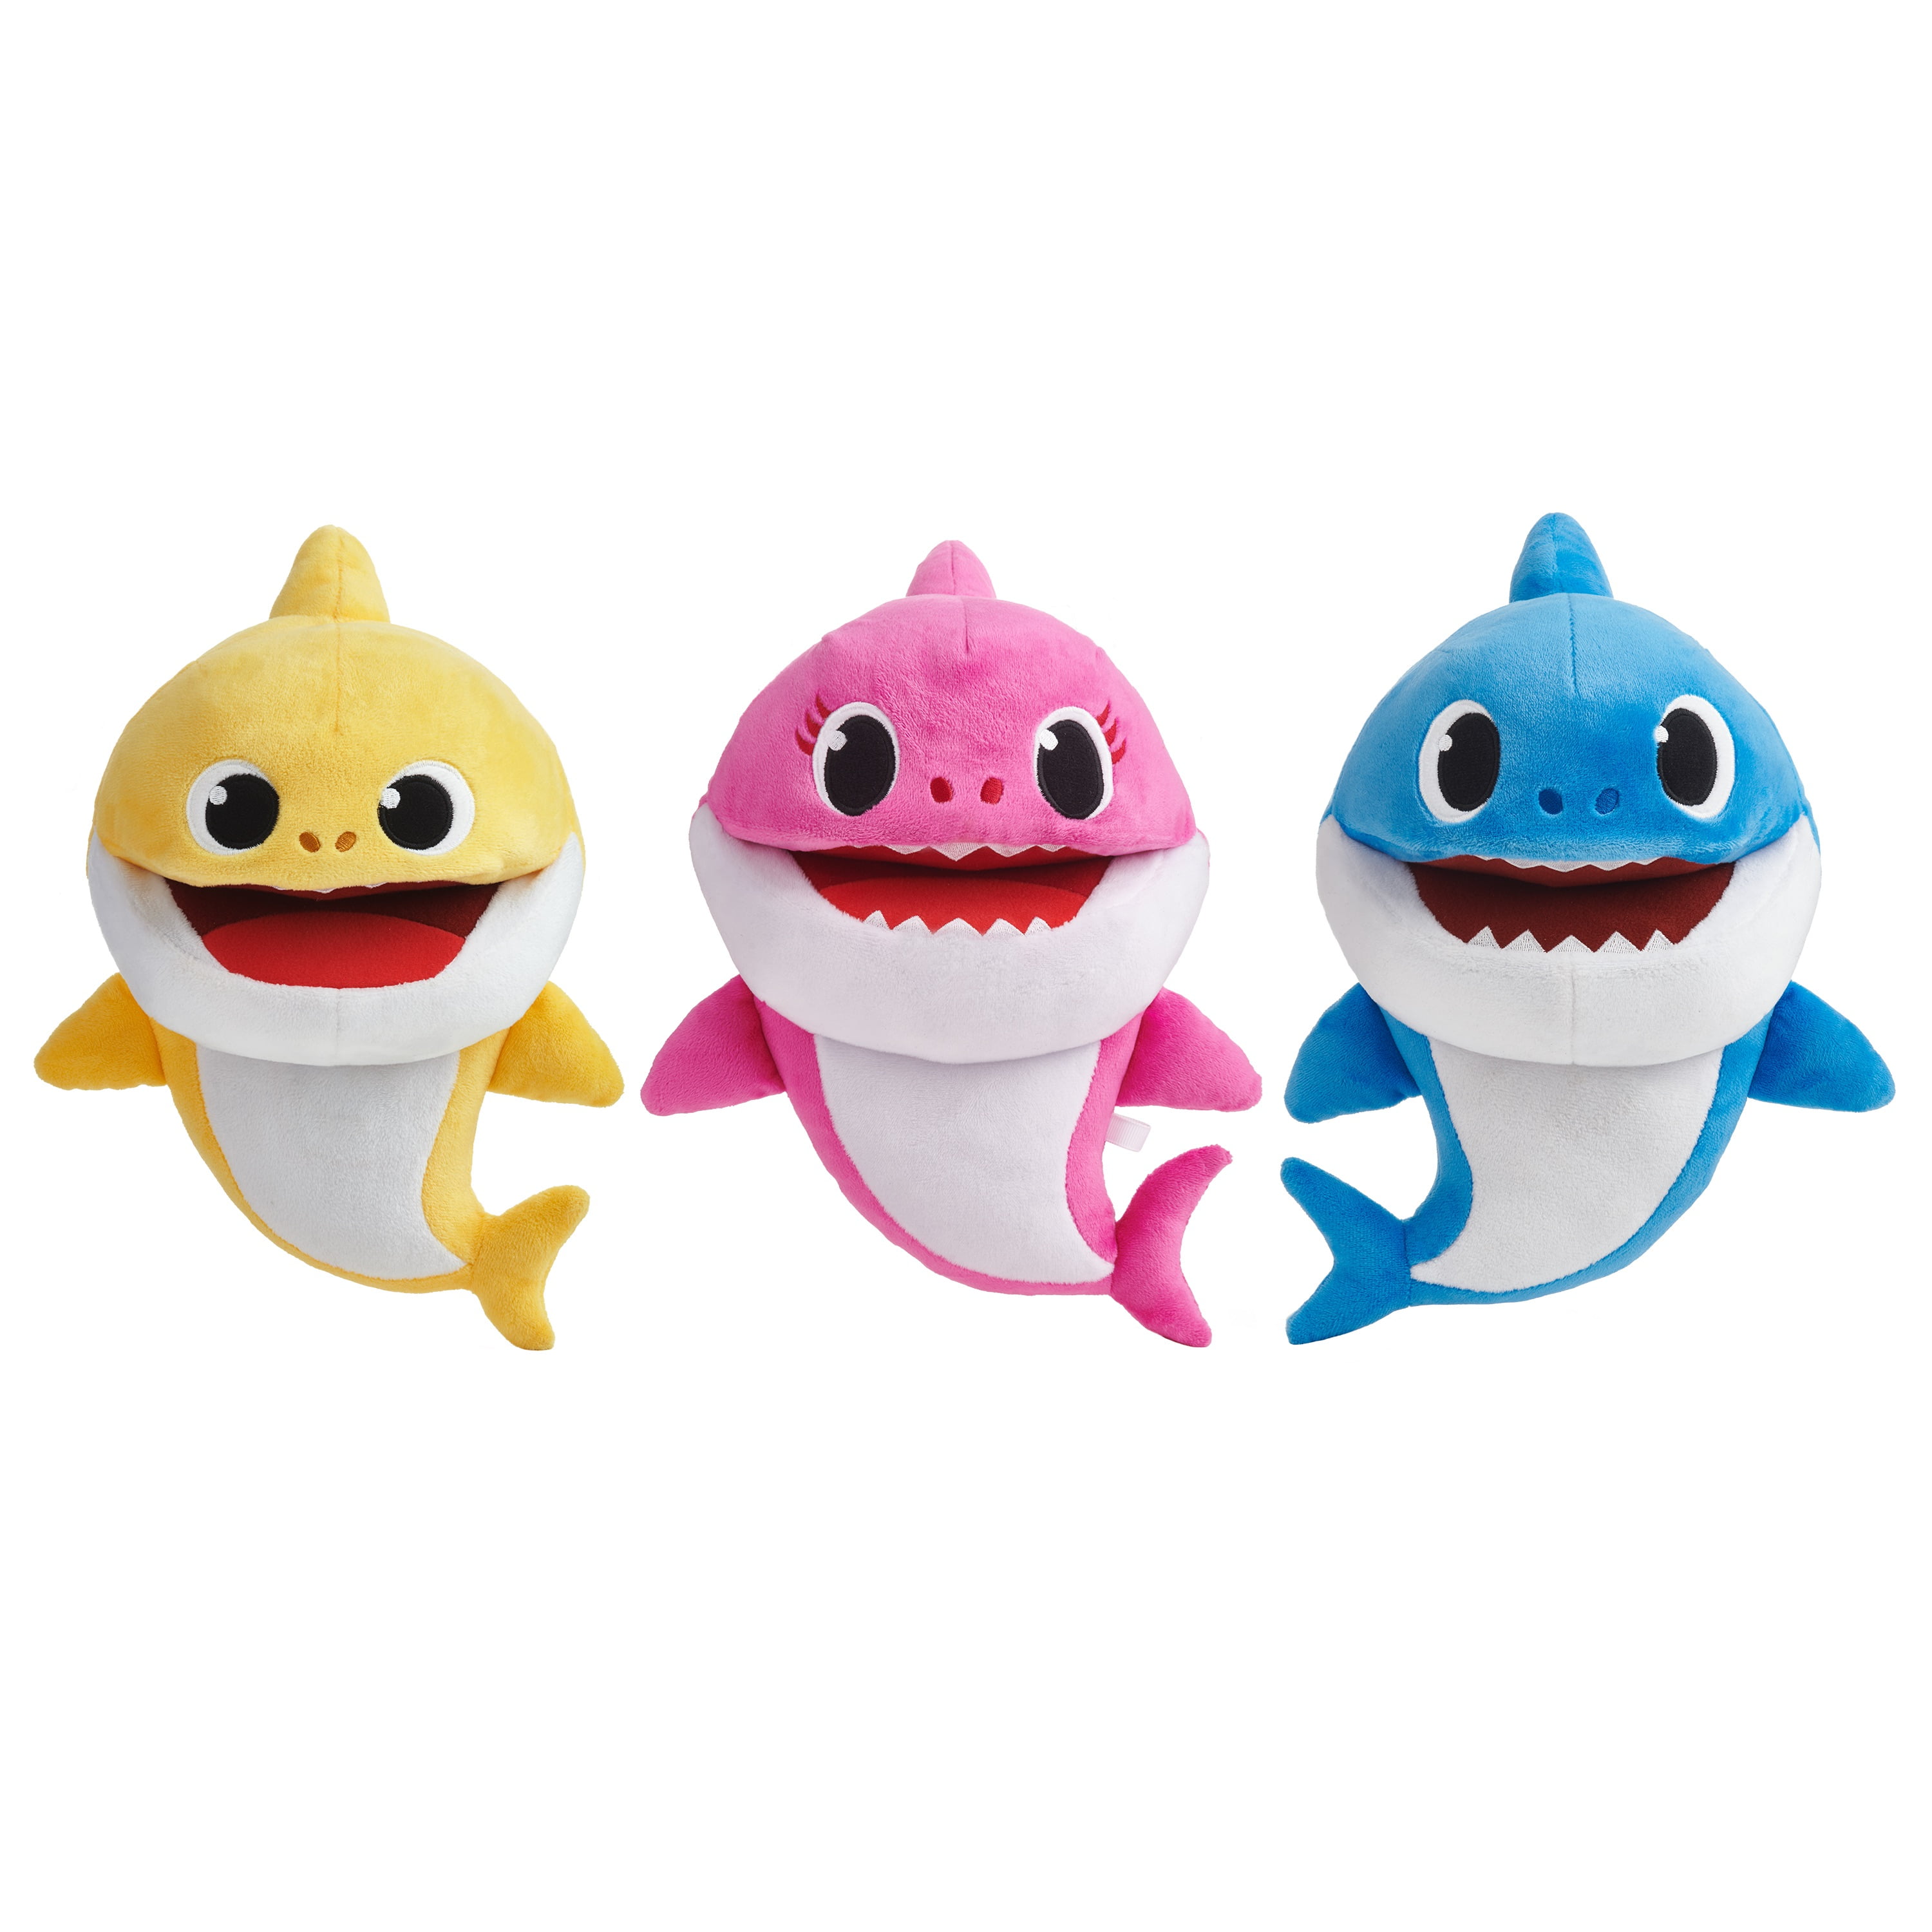 Pinkfong Official Song Puppet with Tempo Control - Mommy Shark - Interactive Plush Toy - By WowWee -